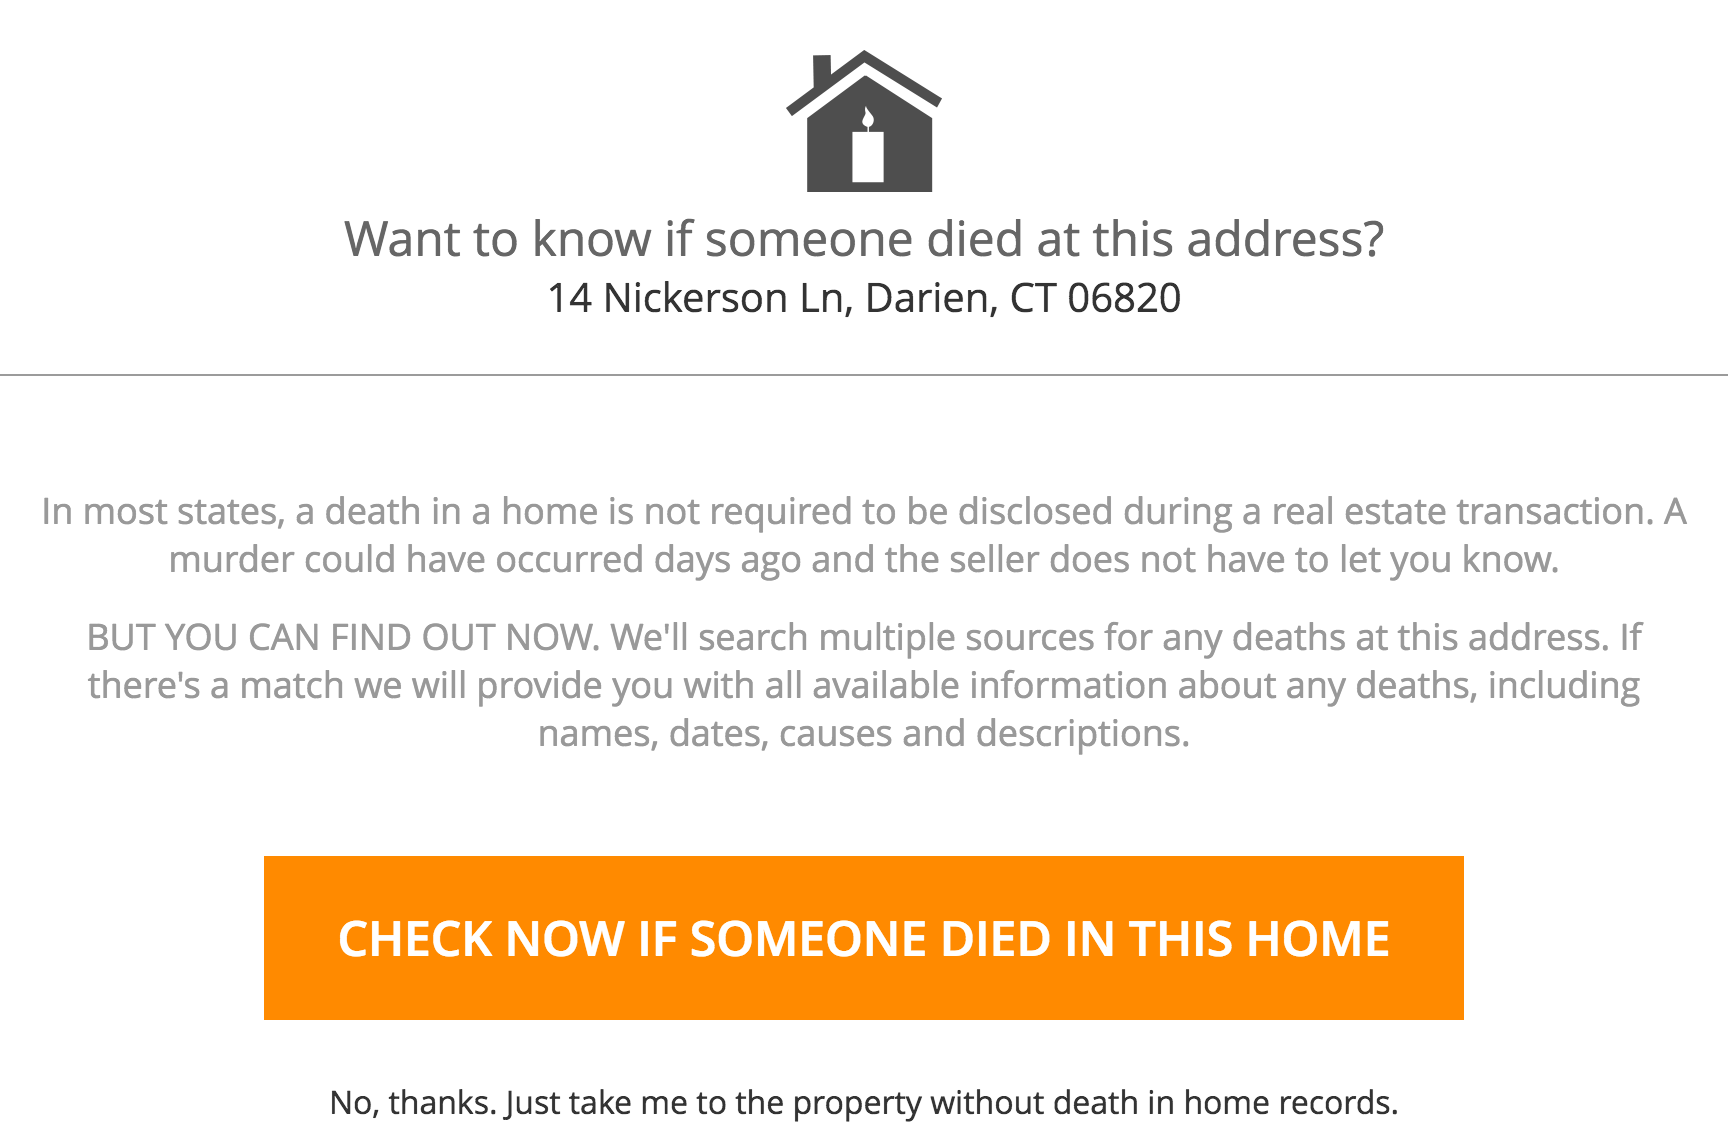 HomeDisclosure currently prompts consumers who request property reports to order home death reports, which cost $10 per home. 